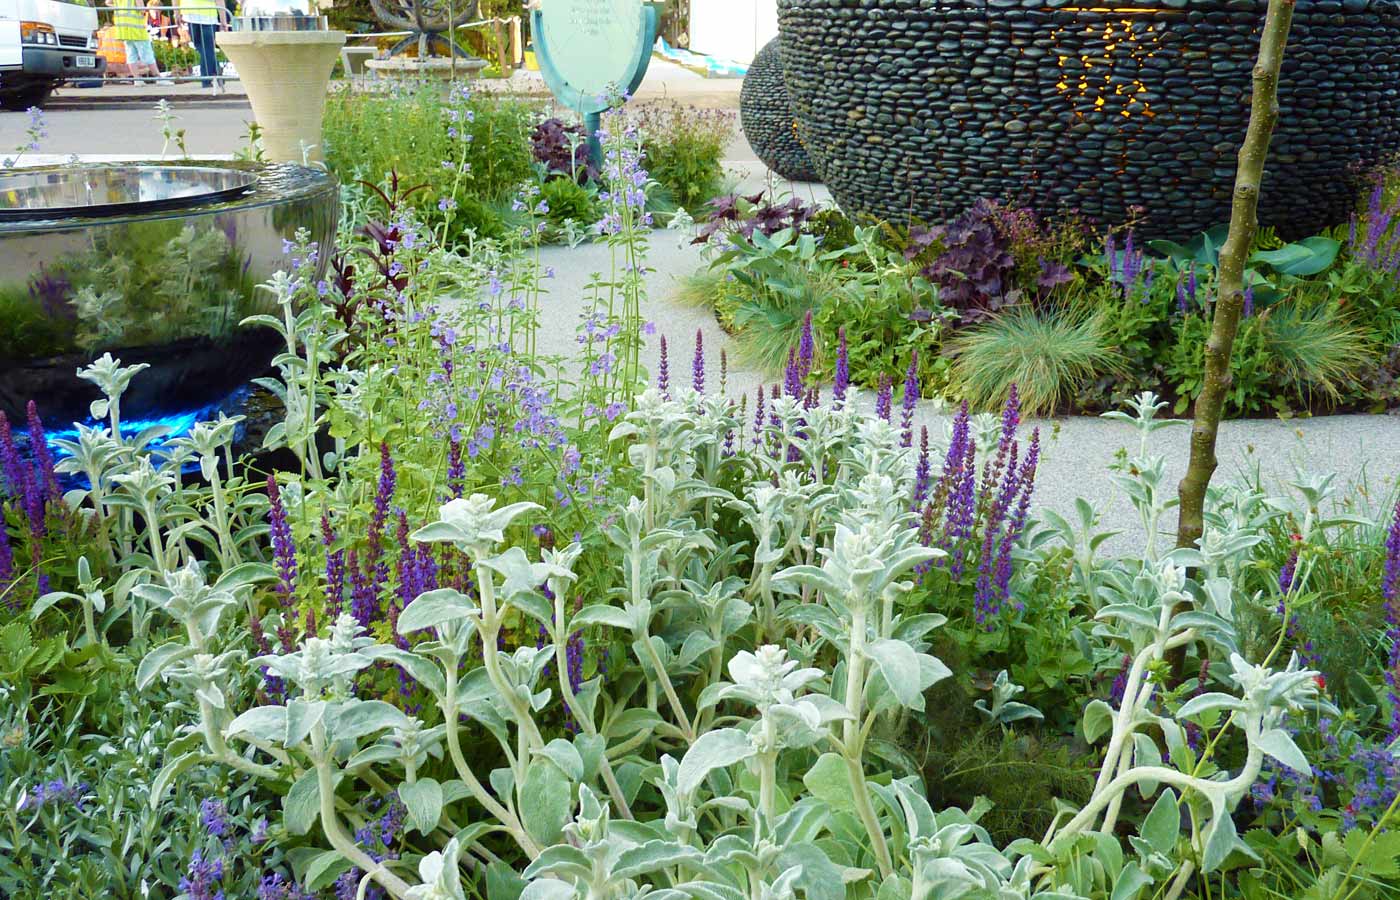 Green, silver and purple planting provides a foil for exhibits